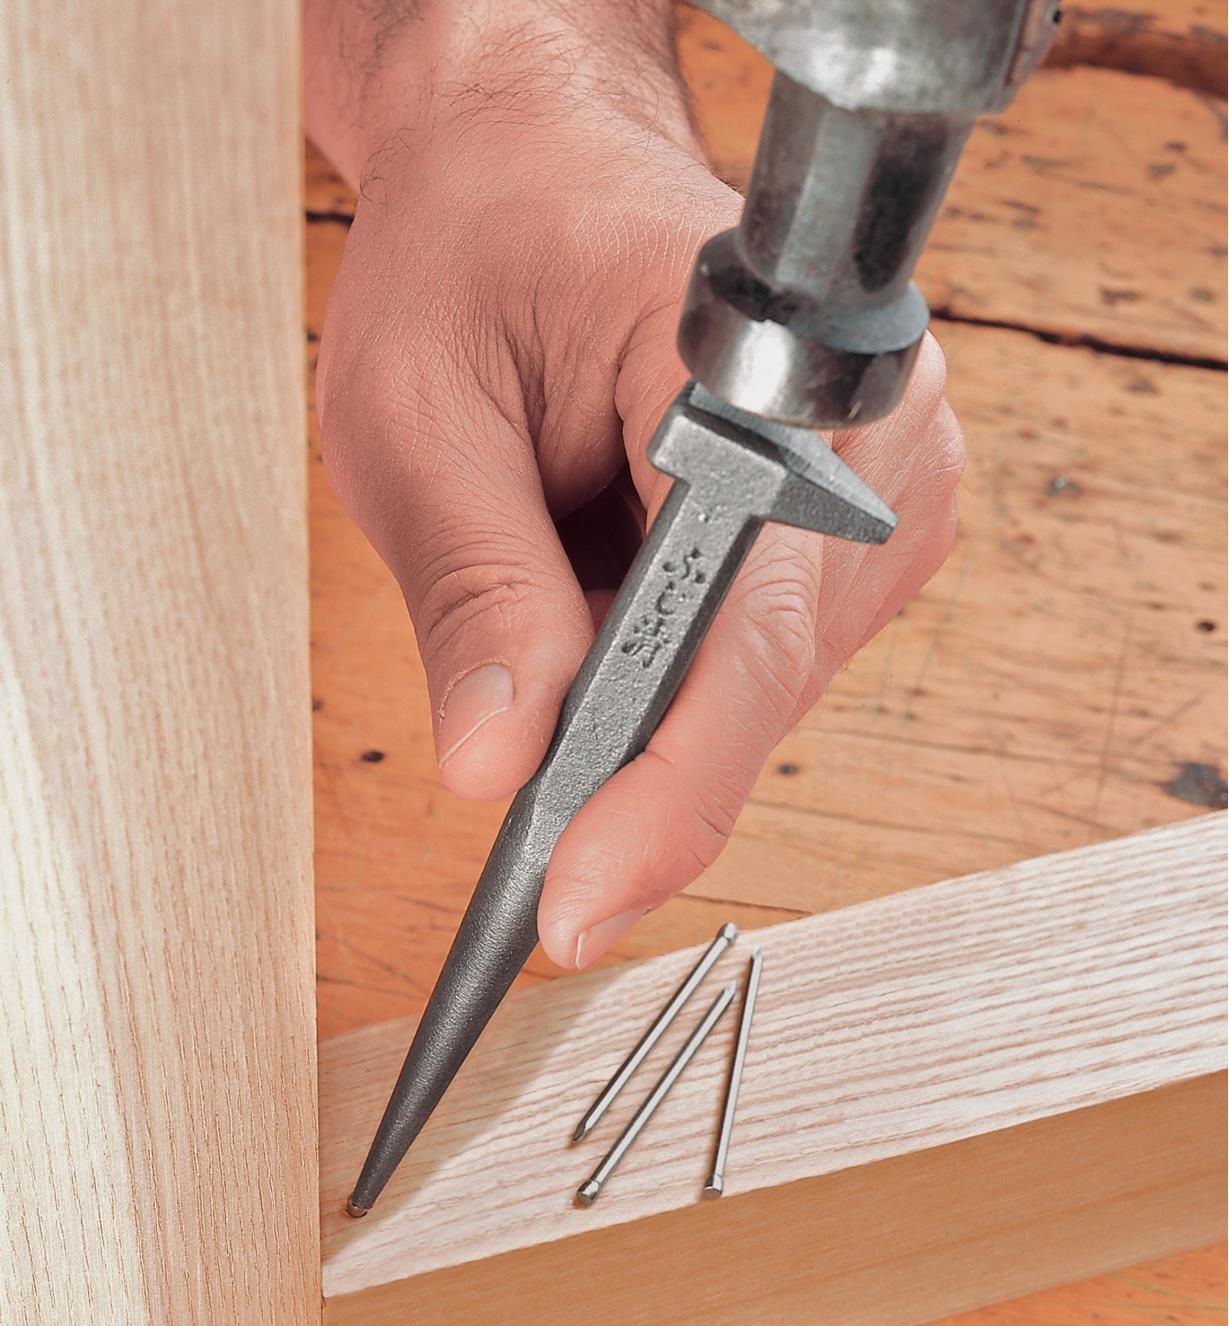 Using a Japanese Nail Set to set a nail in the corner of a frame